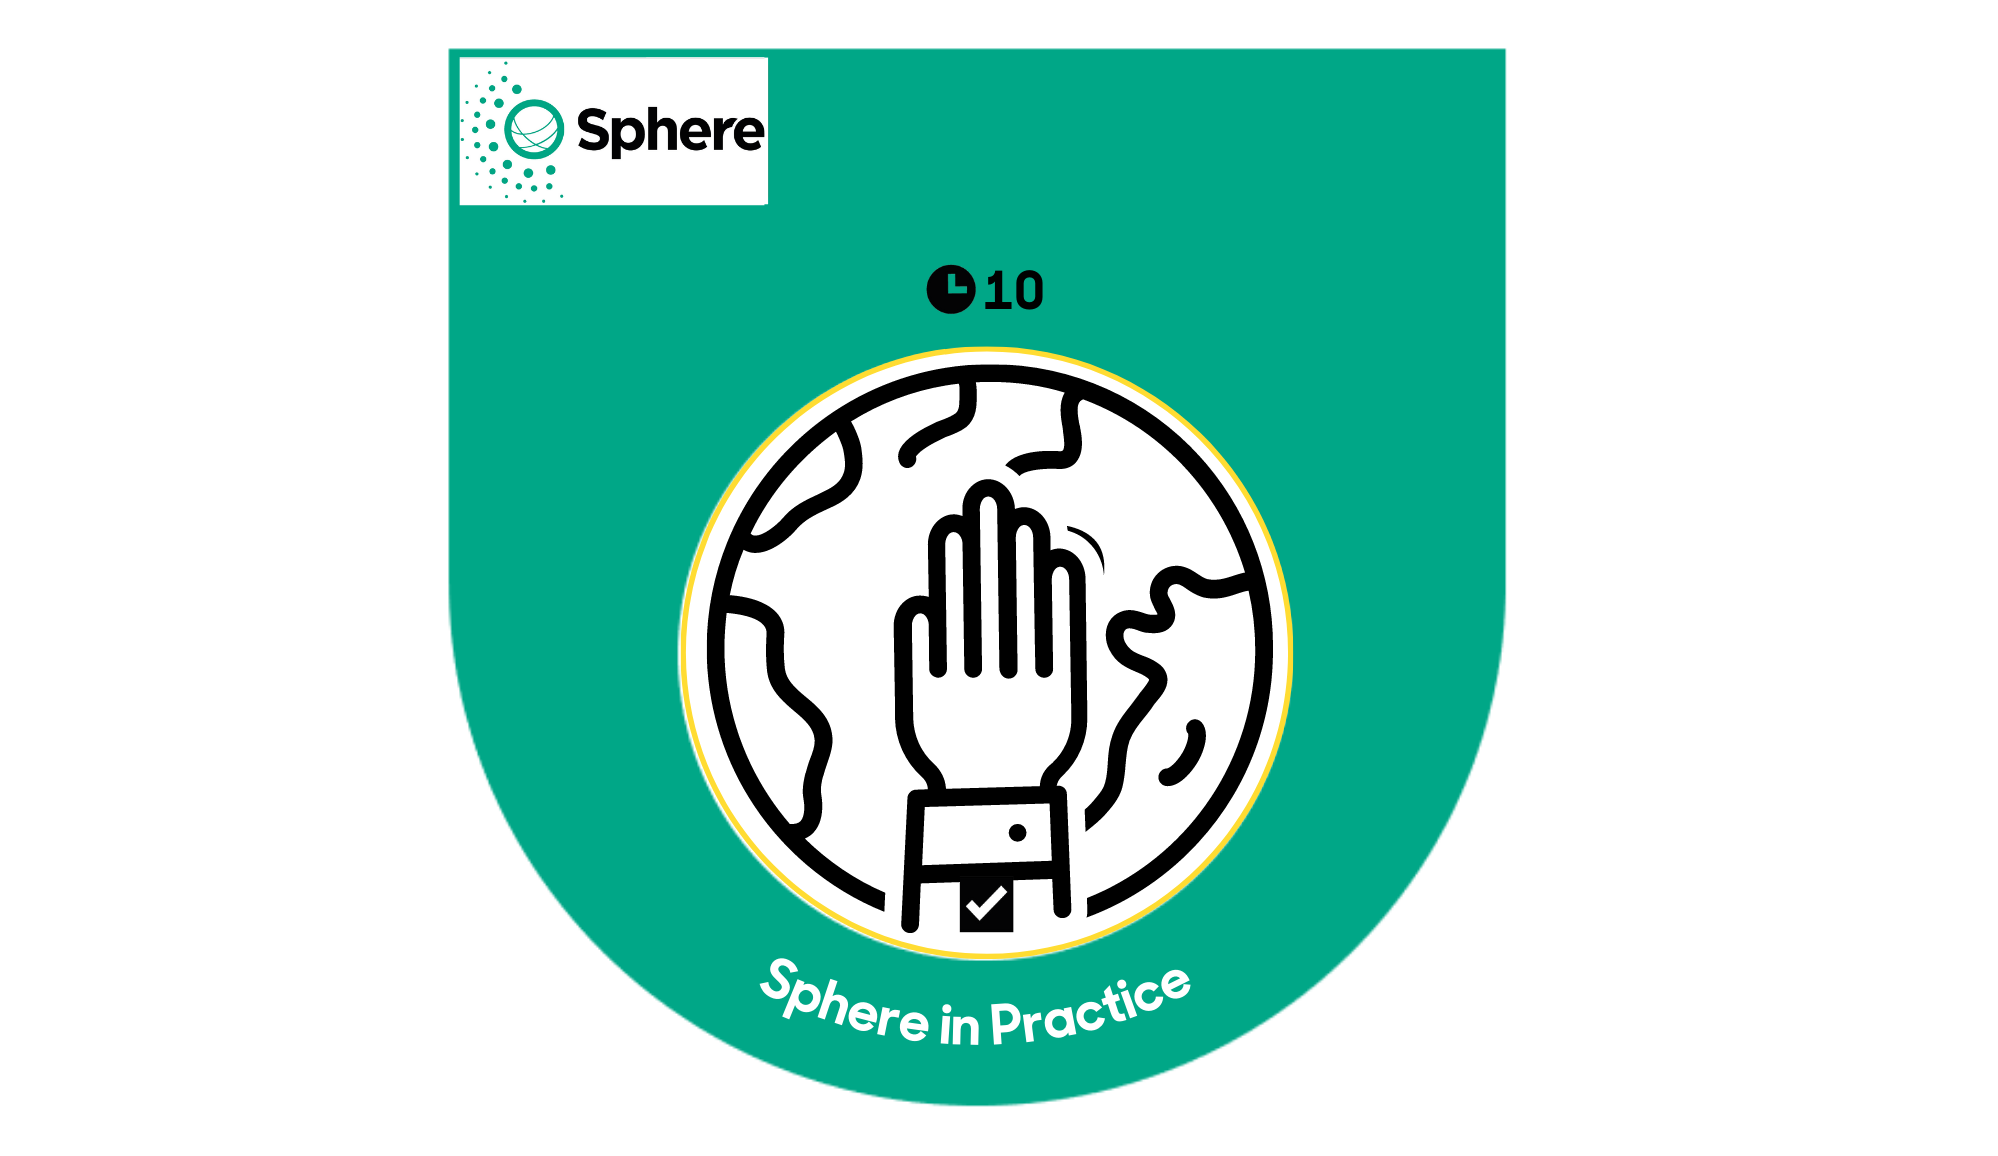 Earn a HPass badge when you complete the Sphere in Practice course